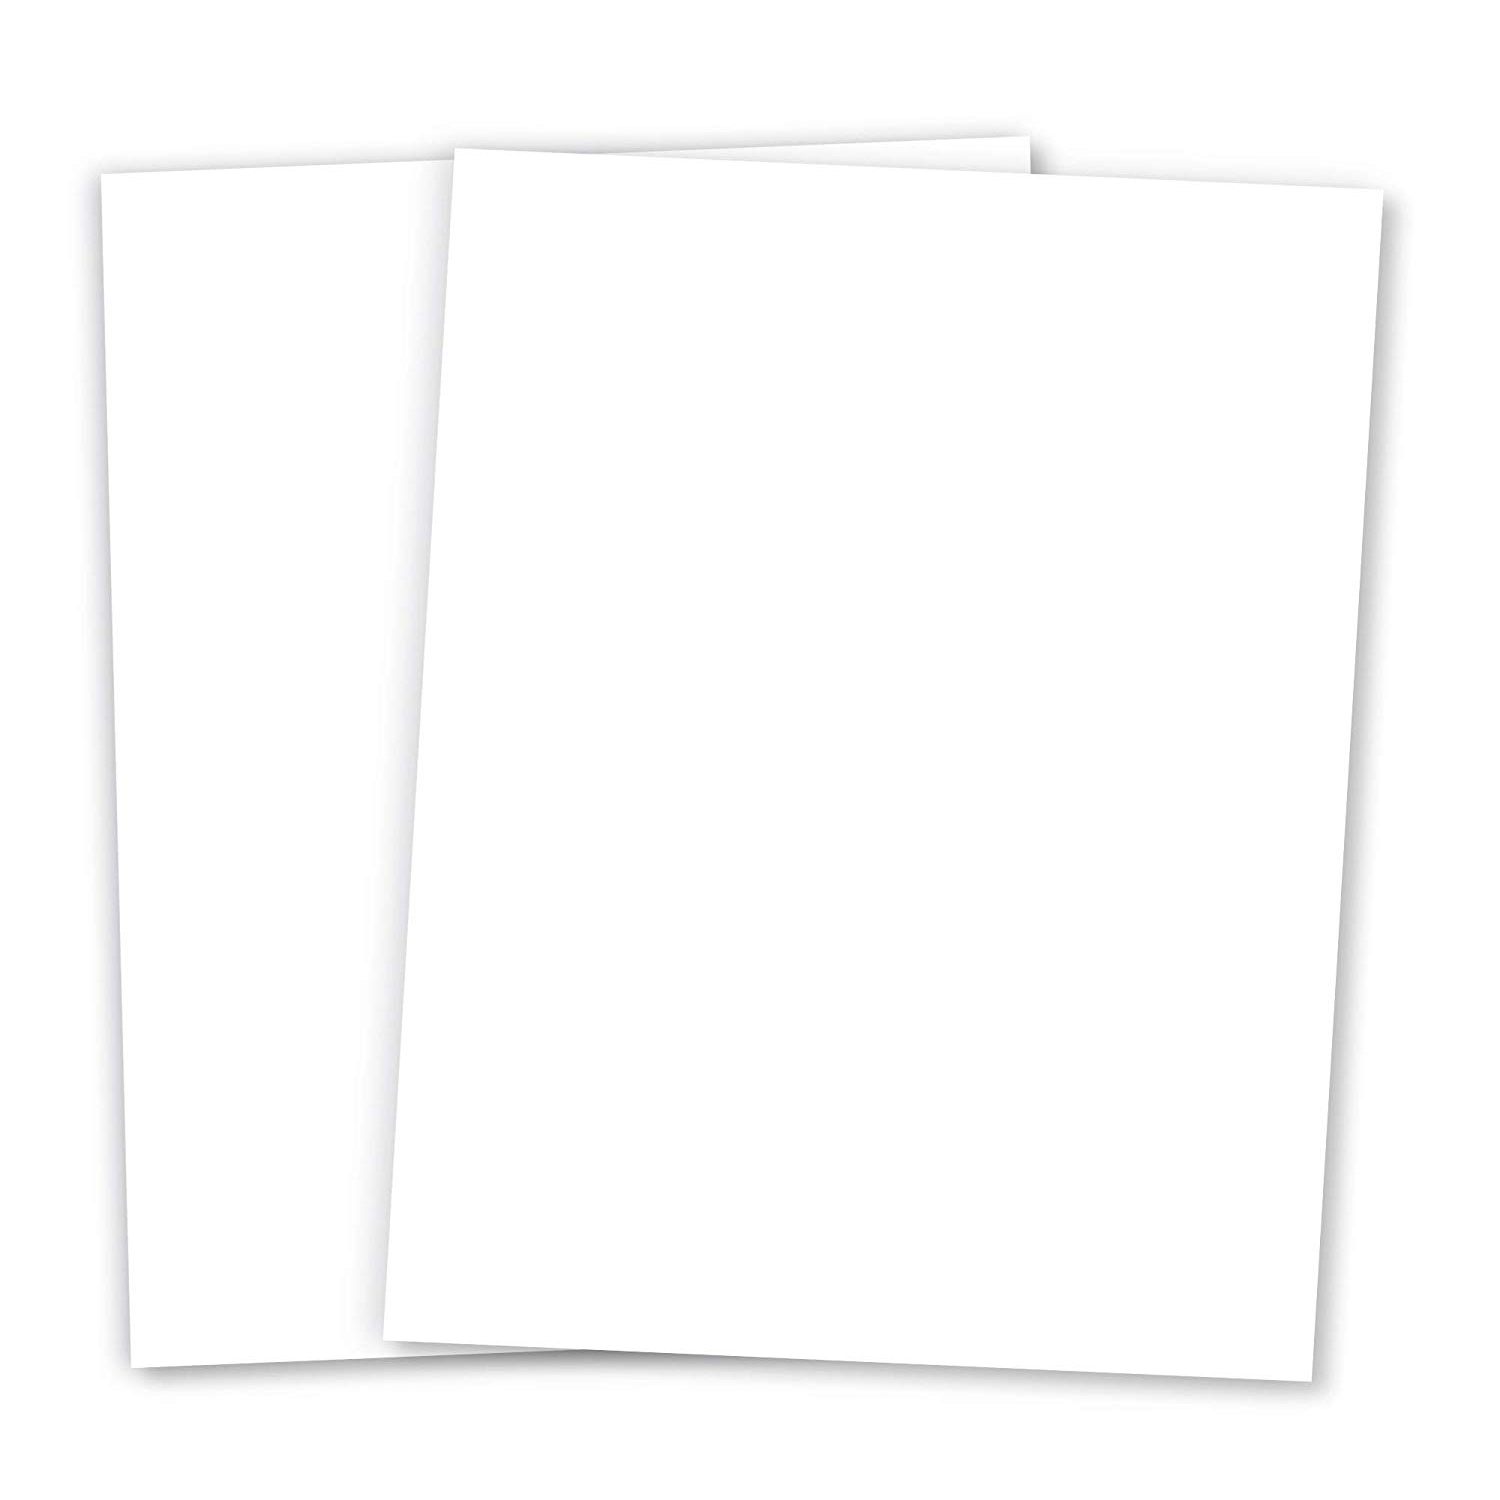 Green 67 Lb Cover Card Stock 100 Sheets Per Pack 11" x 17" Ledger Size 